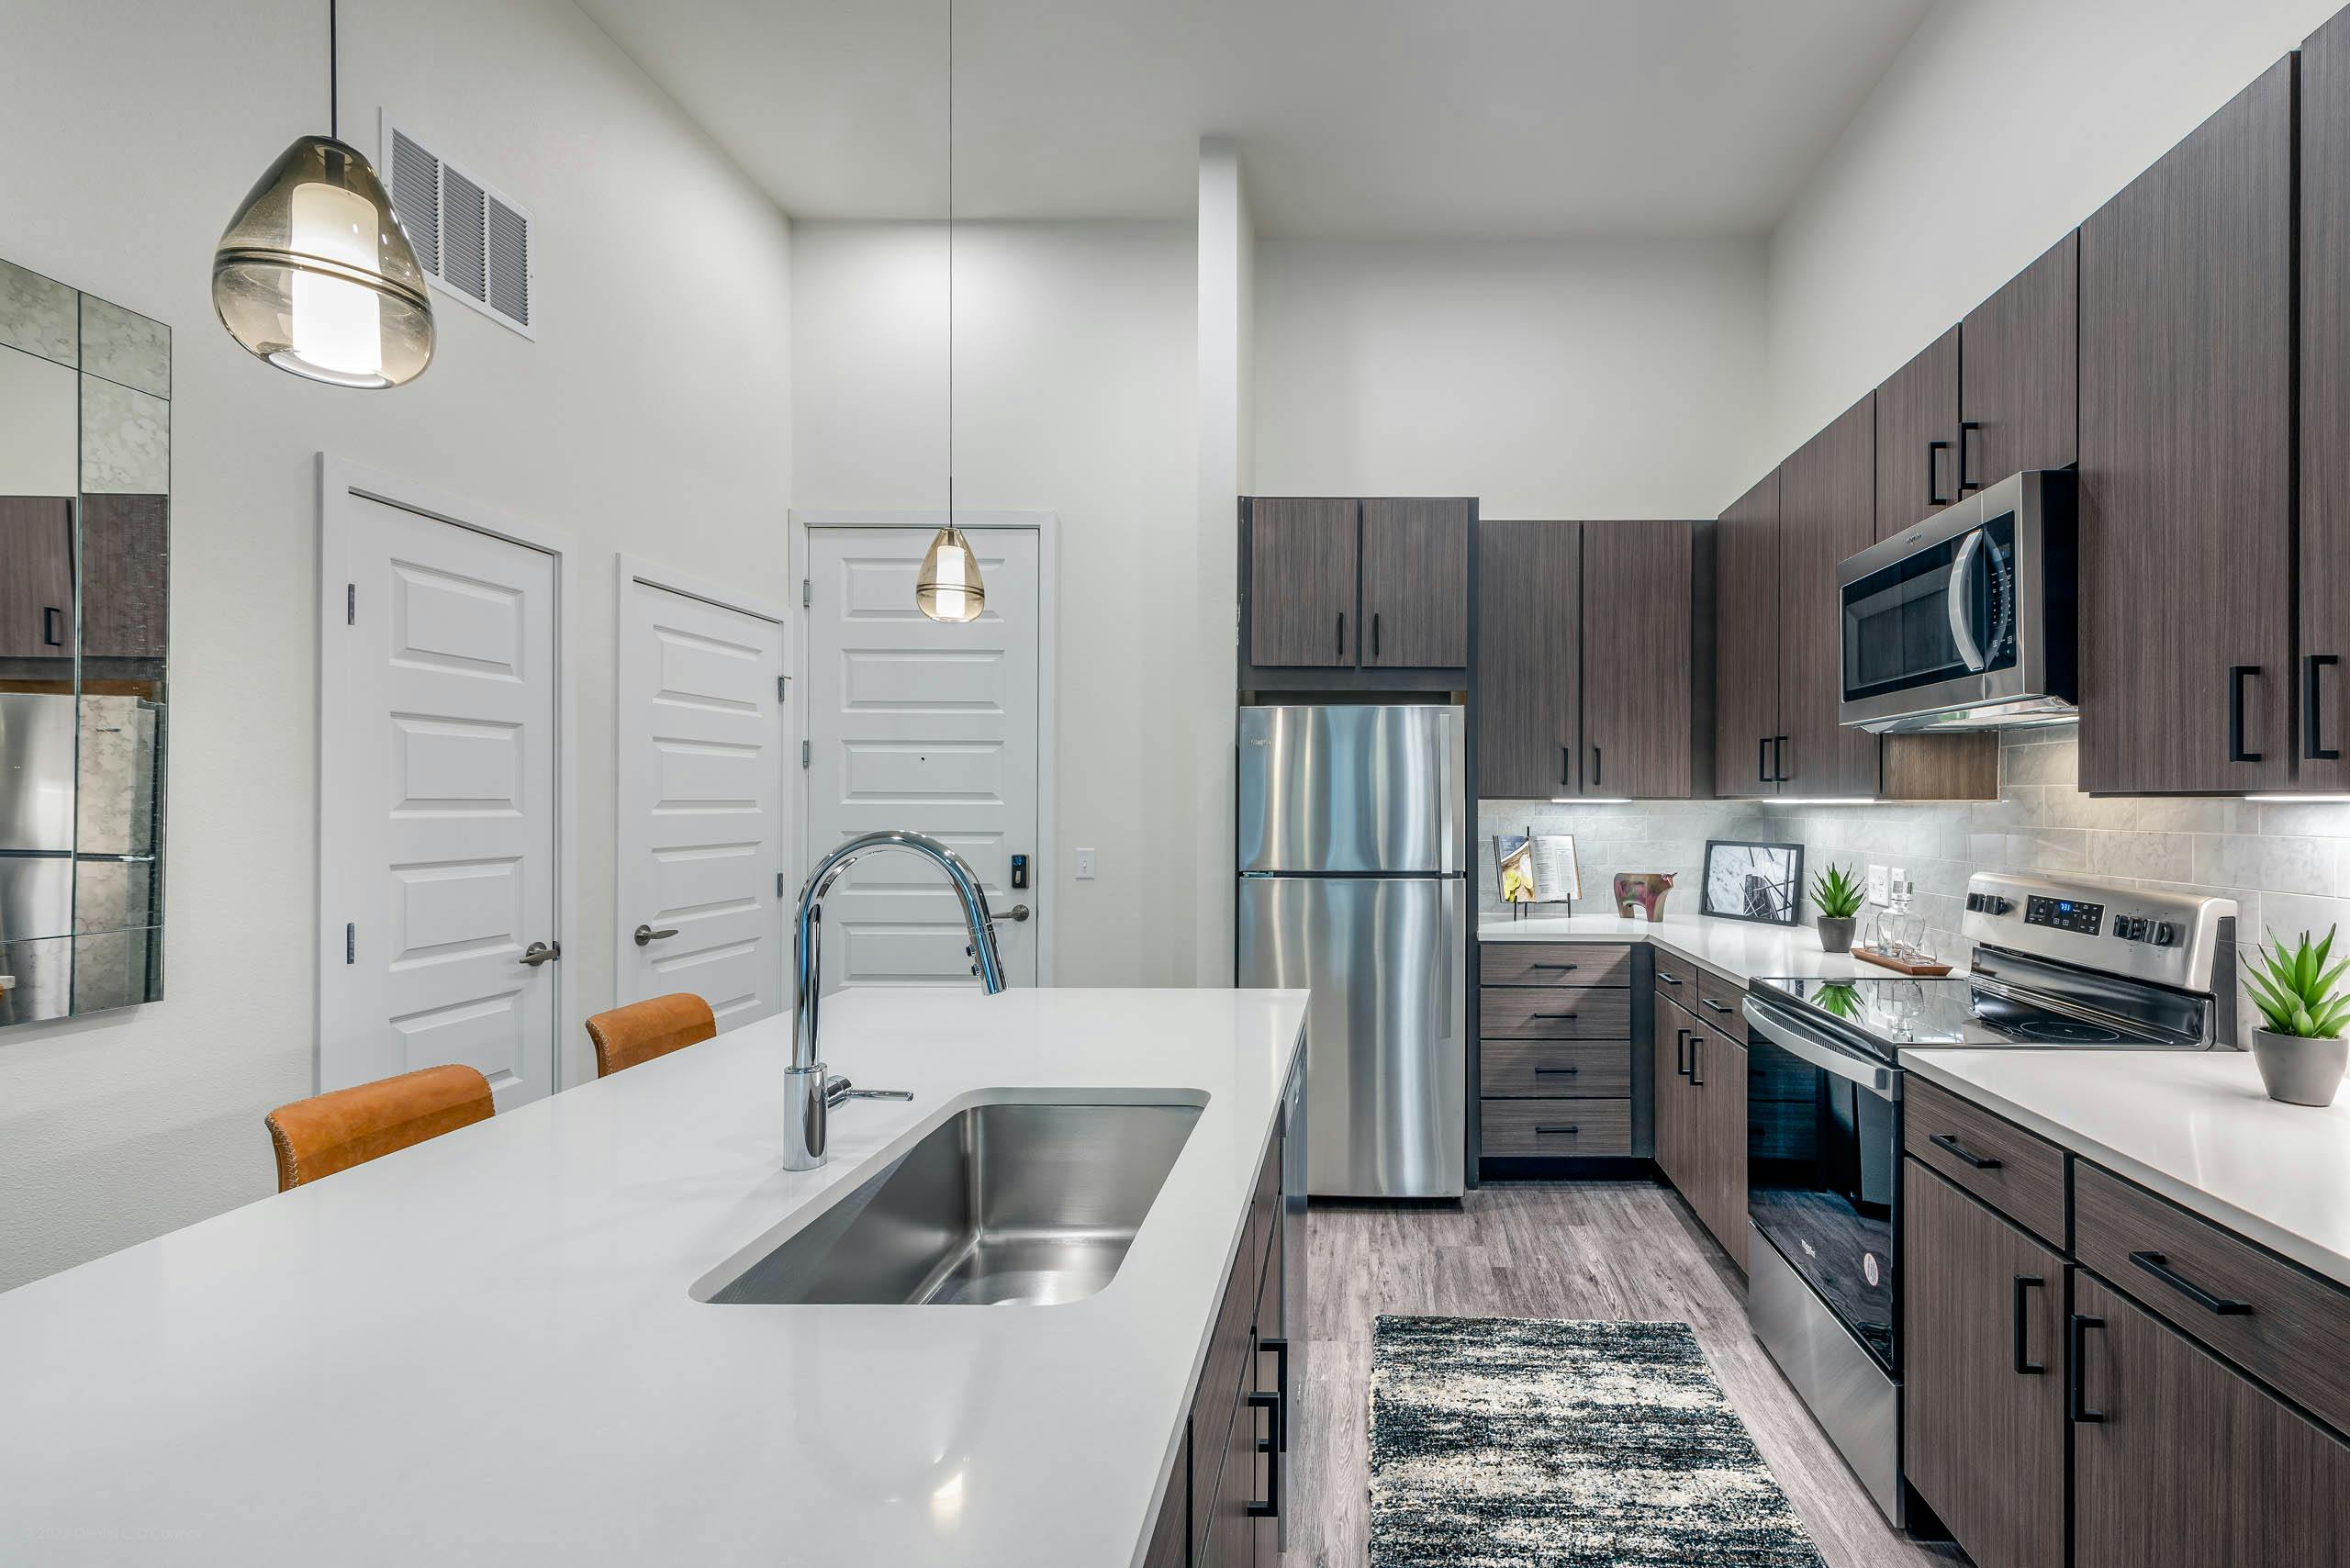 Interior view of a kitchen at AMLI Art District with quartz countertops and tan tile backsplash and view of the living room